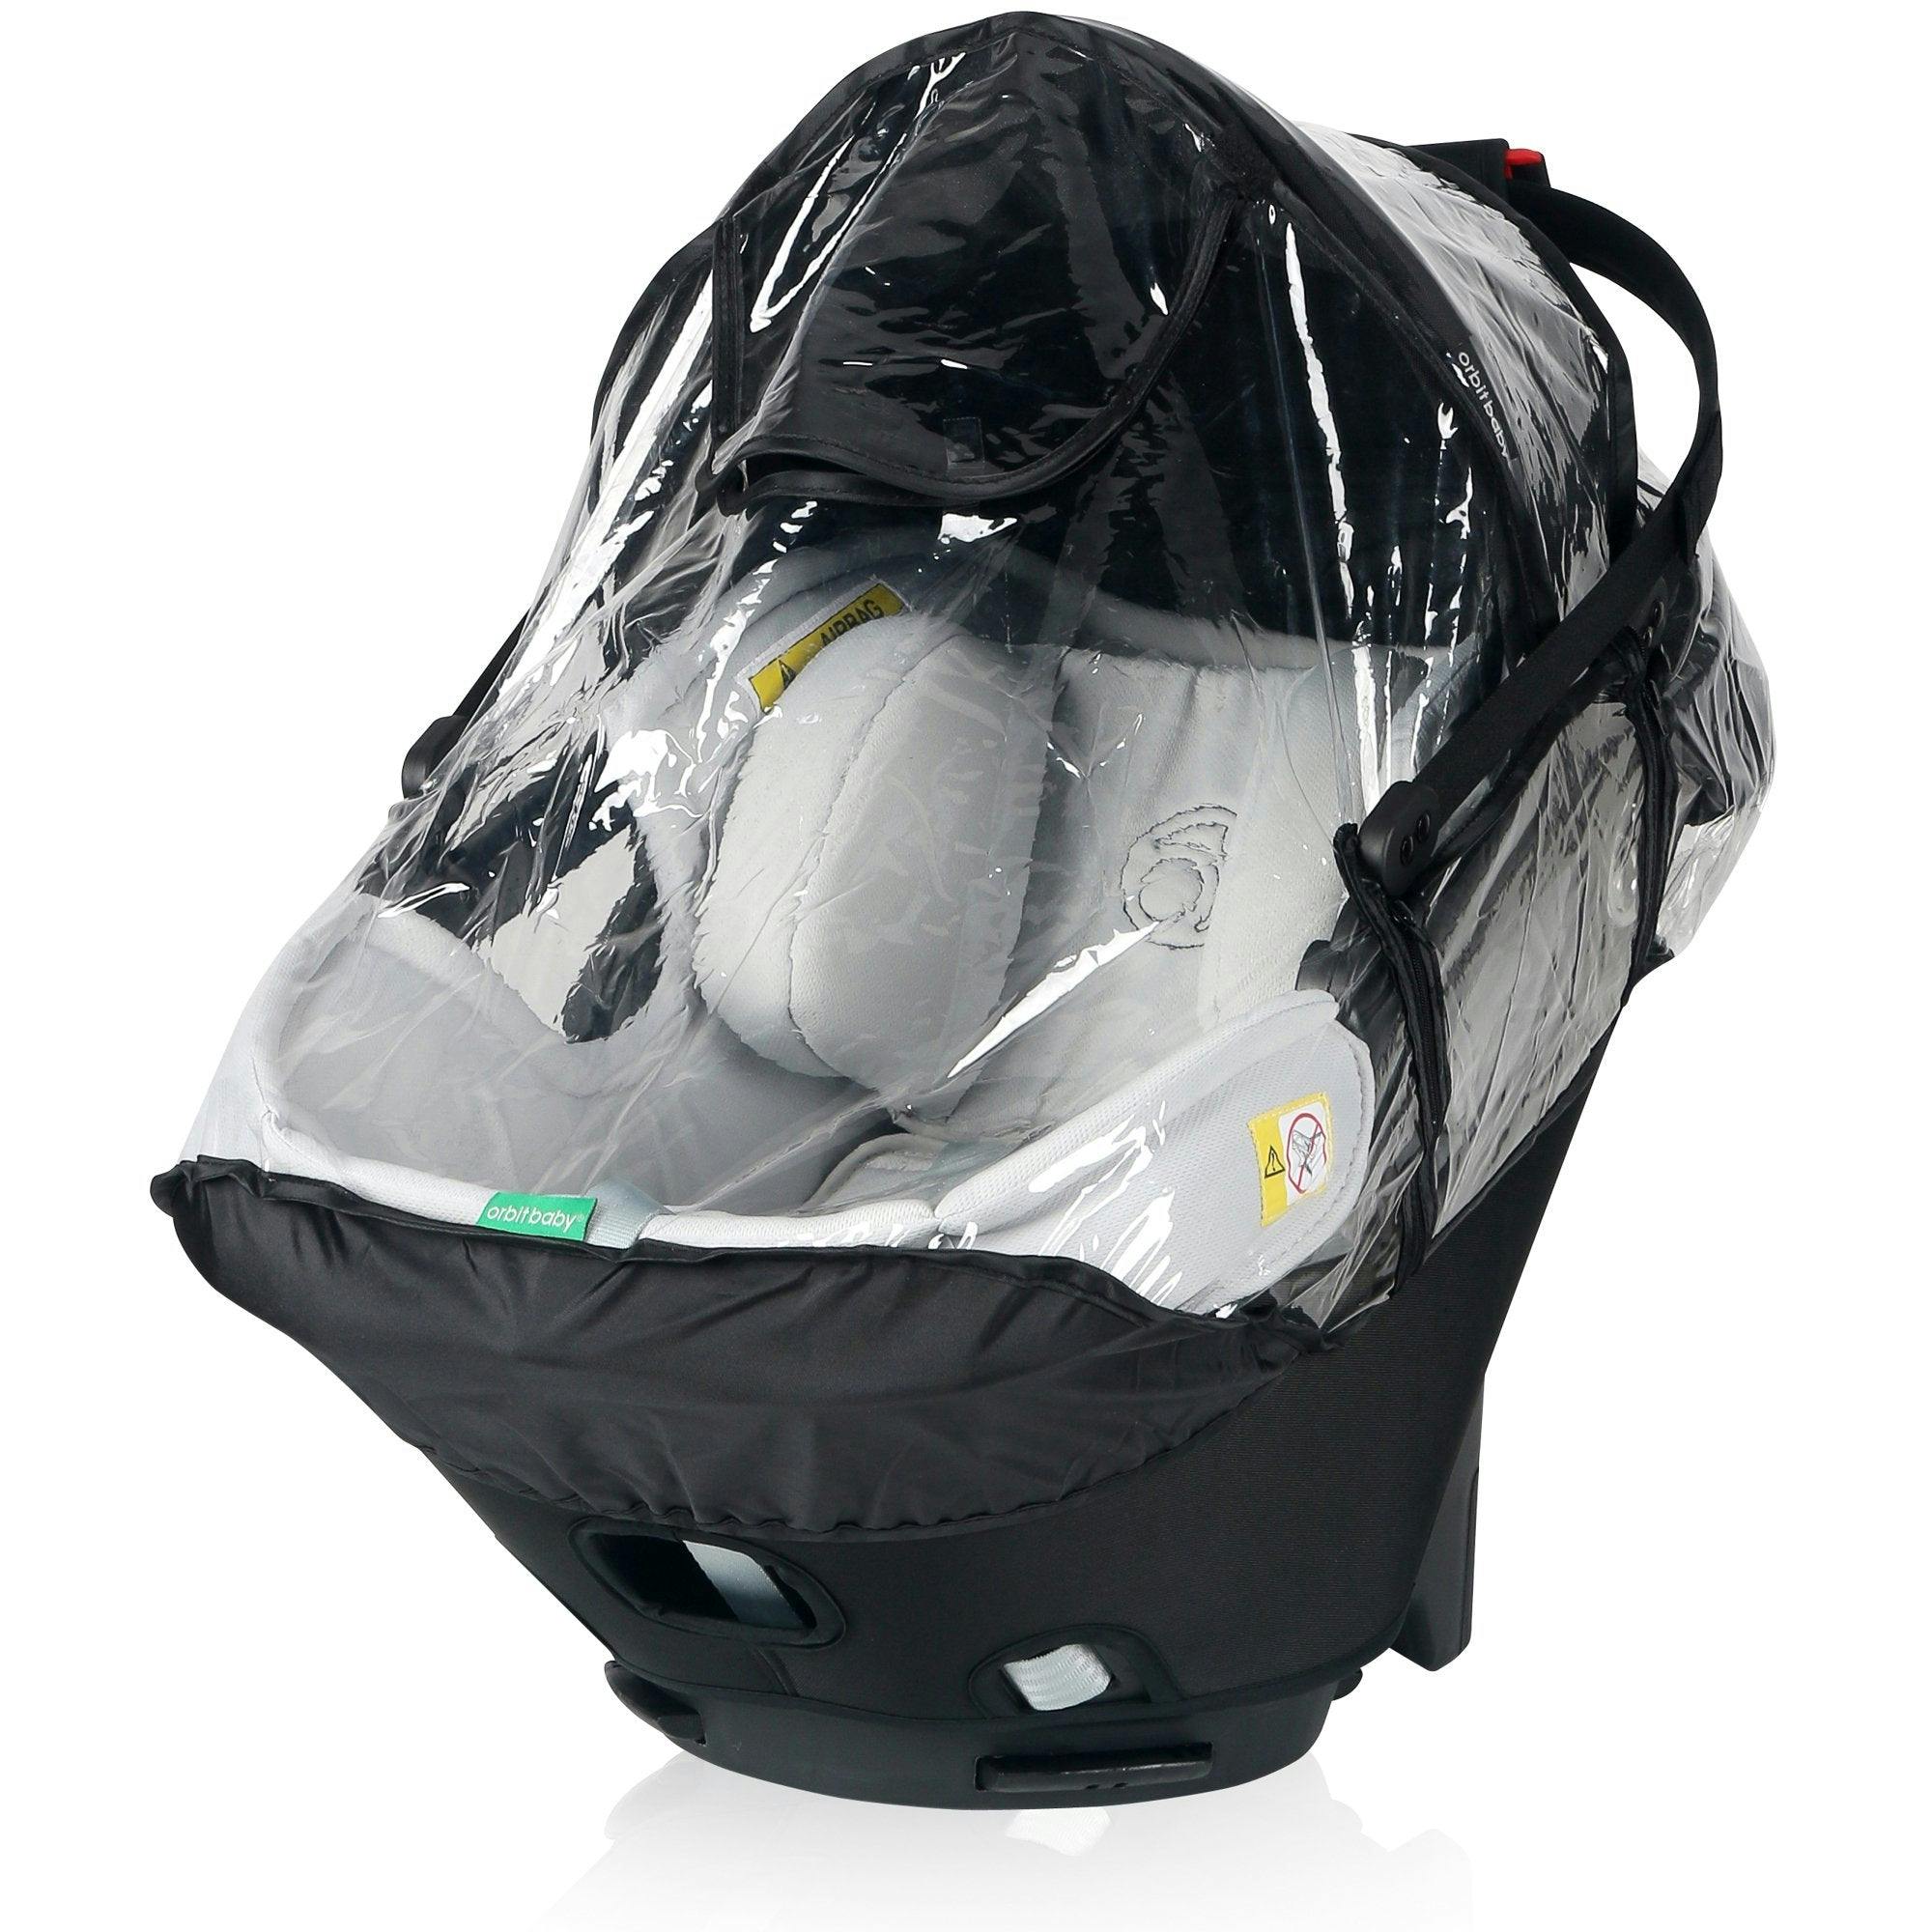 Orbit Baby G5 Infant Car Seat and Bassinet Rain Cover